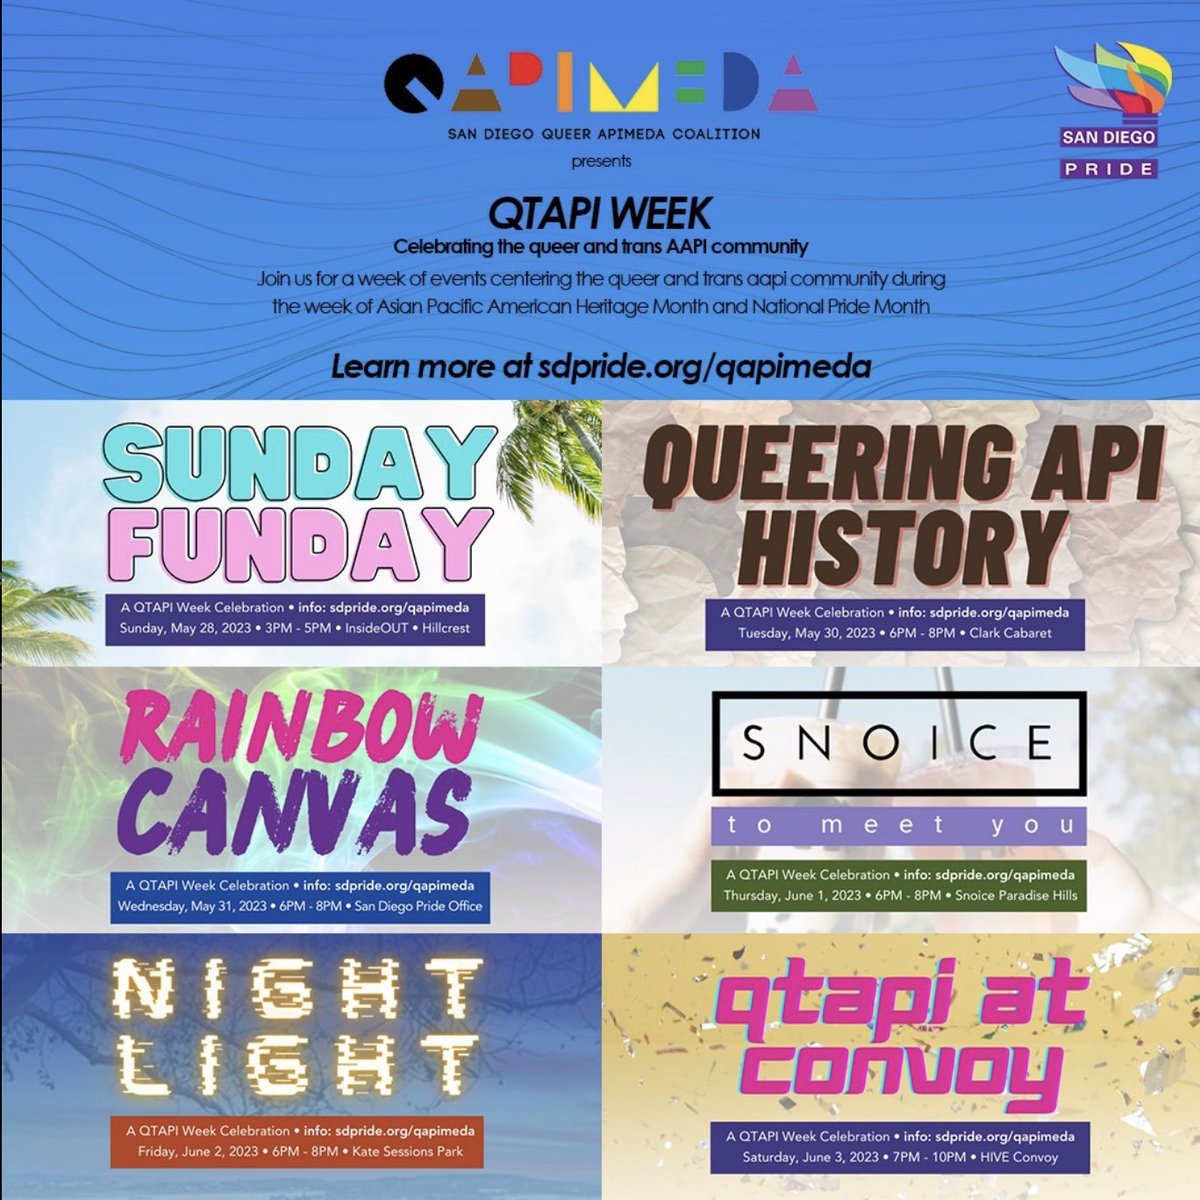 It's QTAPI week which is an opportunity to celebrate the LGBTQ+ AAPI community. This week of celebrations in San Diego will cap off #AAPIHeritageMonth and #NationalPrideMonth 
Visit sdpride.org/qapimeda/ for more information on all the events.